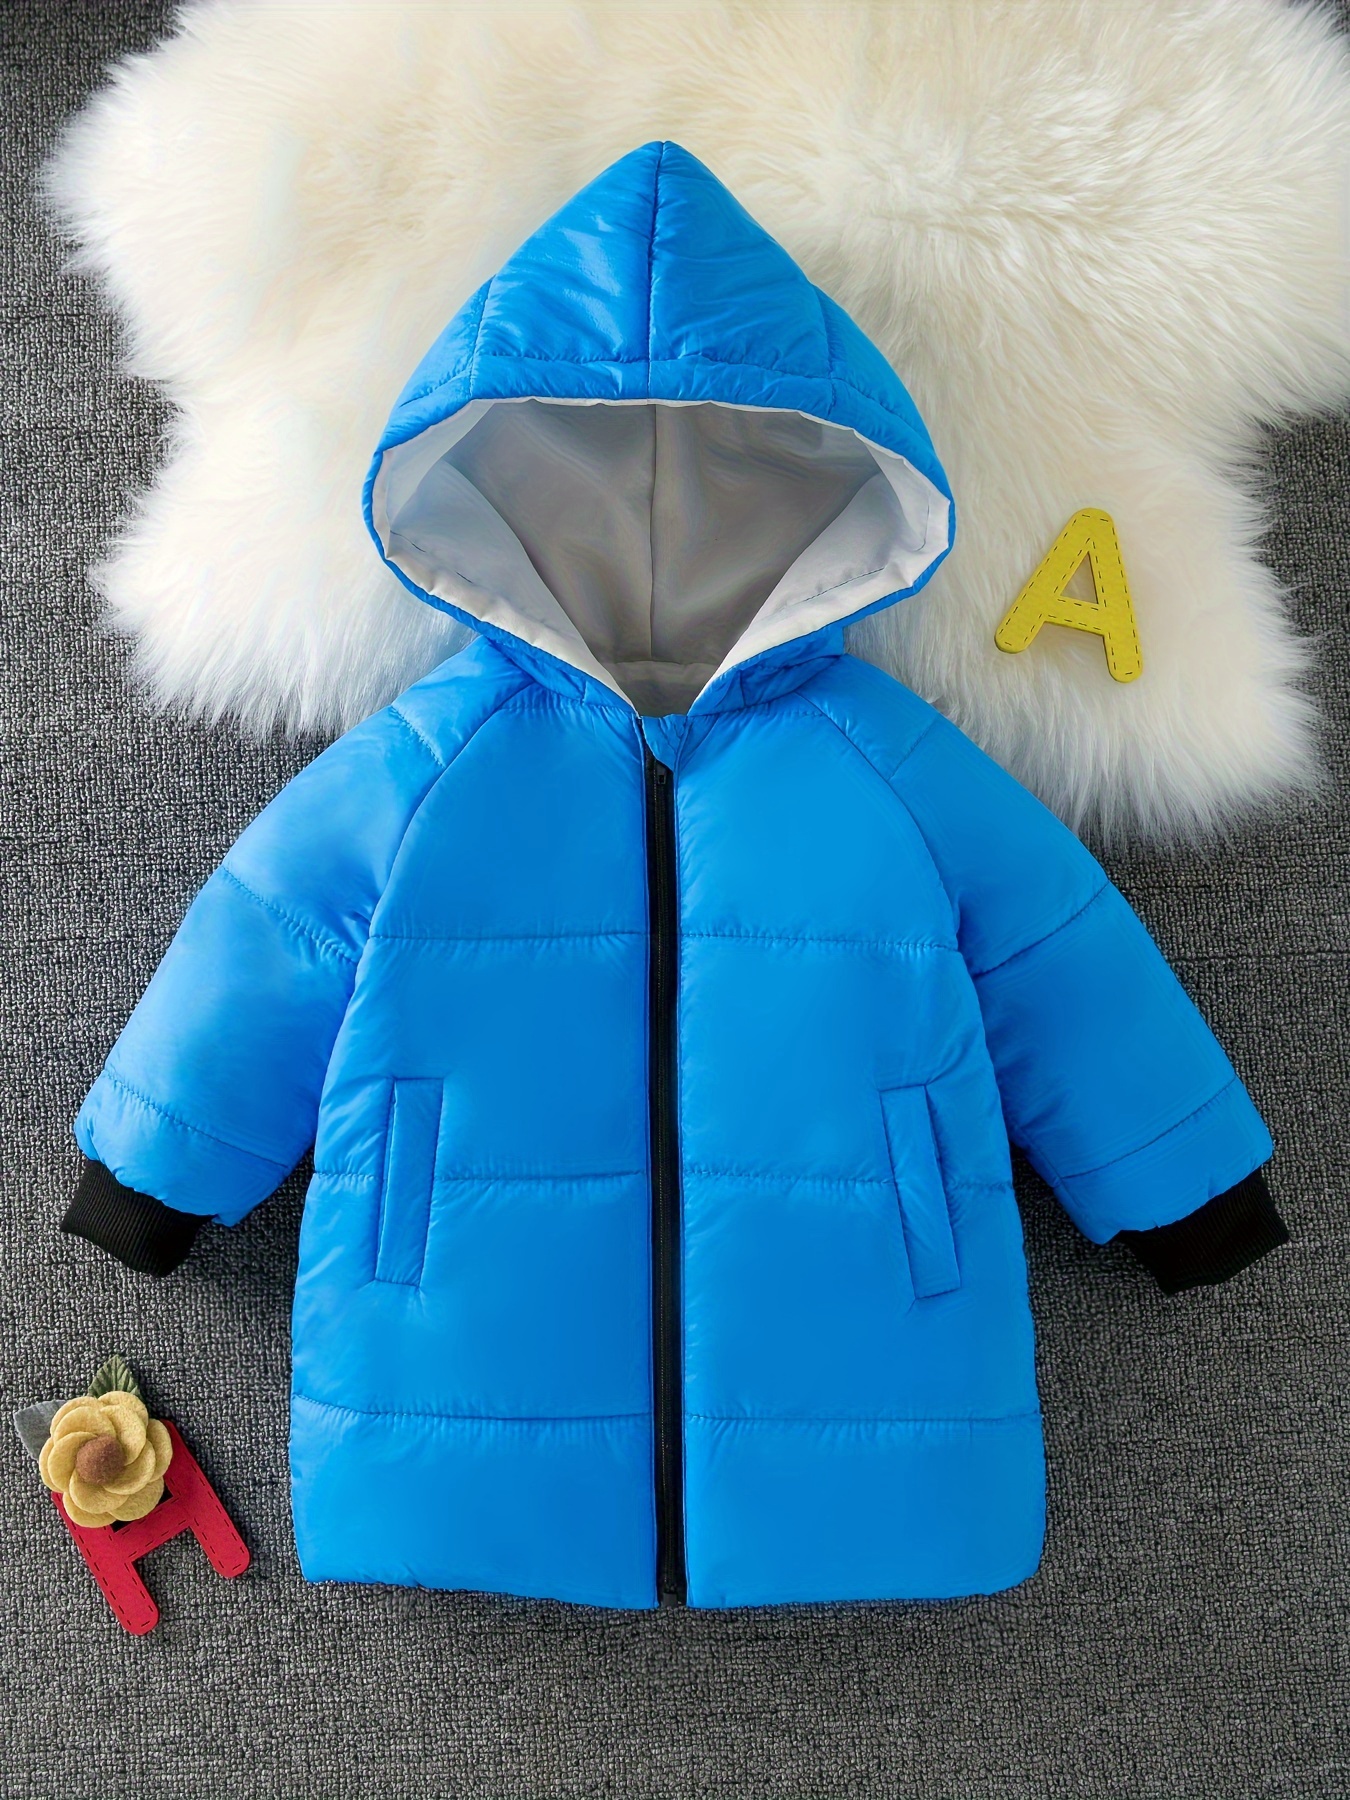 Winter Coats Toddler Baby Boys Girls Warm Lined Thick Jacket